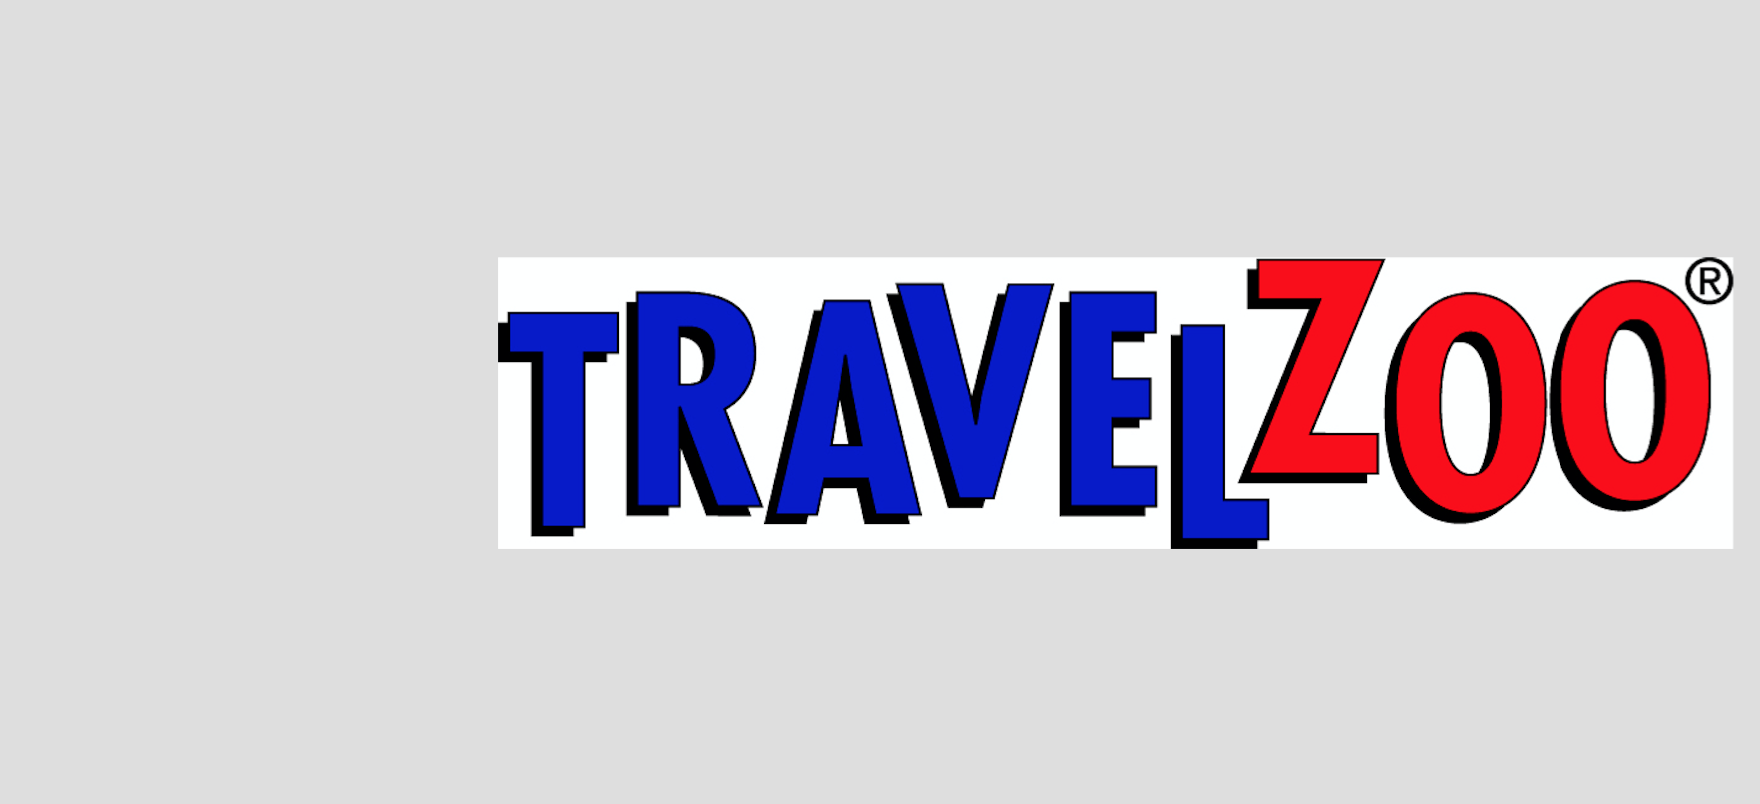 Travelzoo Logo - Interview with Rachel Barnett, General Counsel of Travelzoo ...